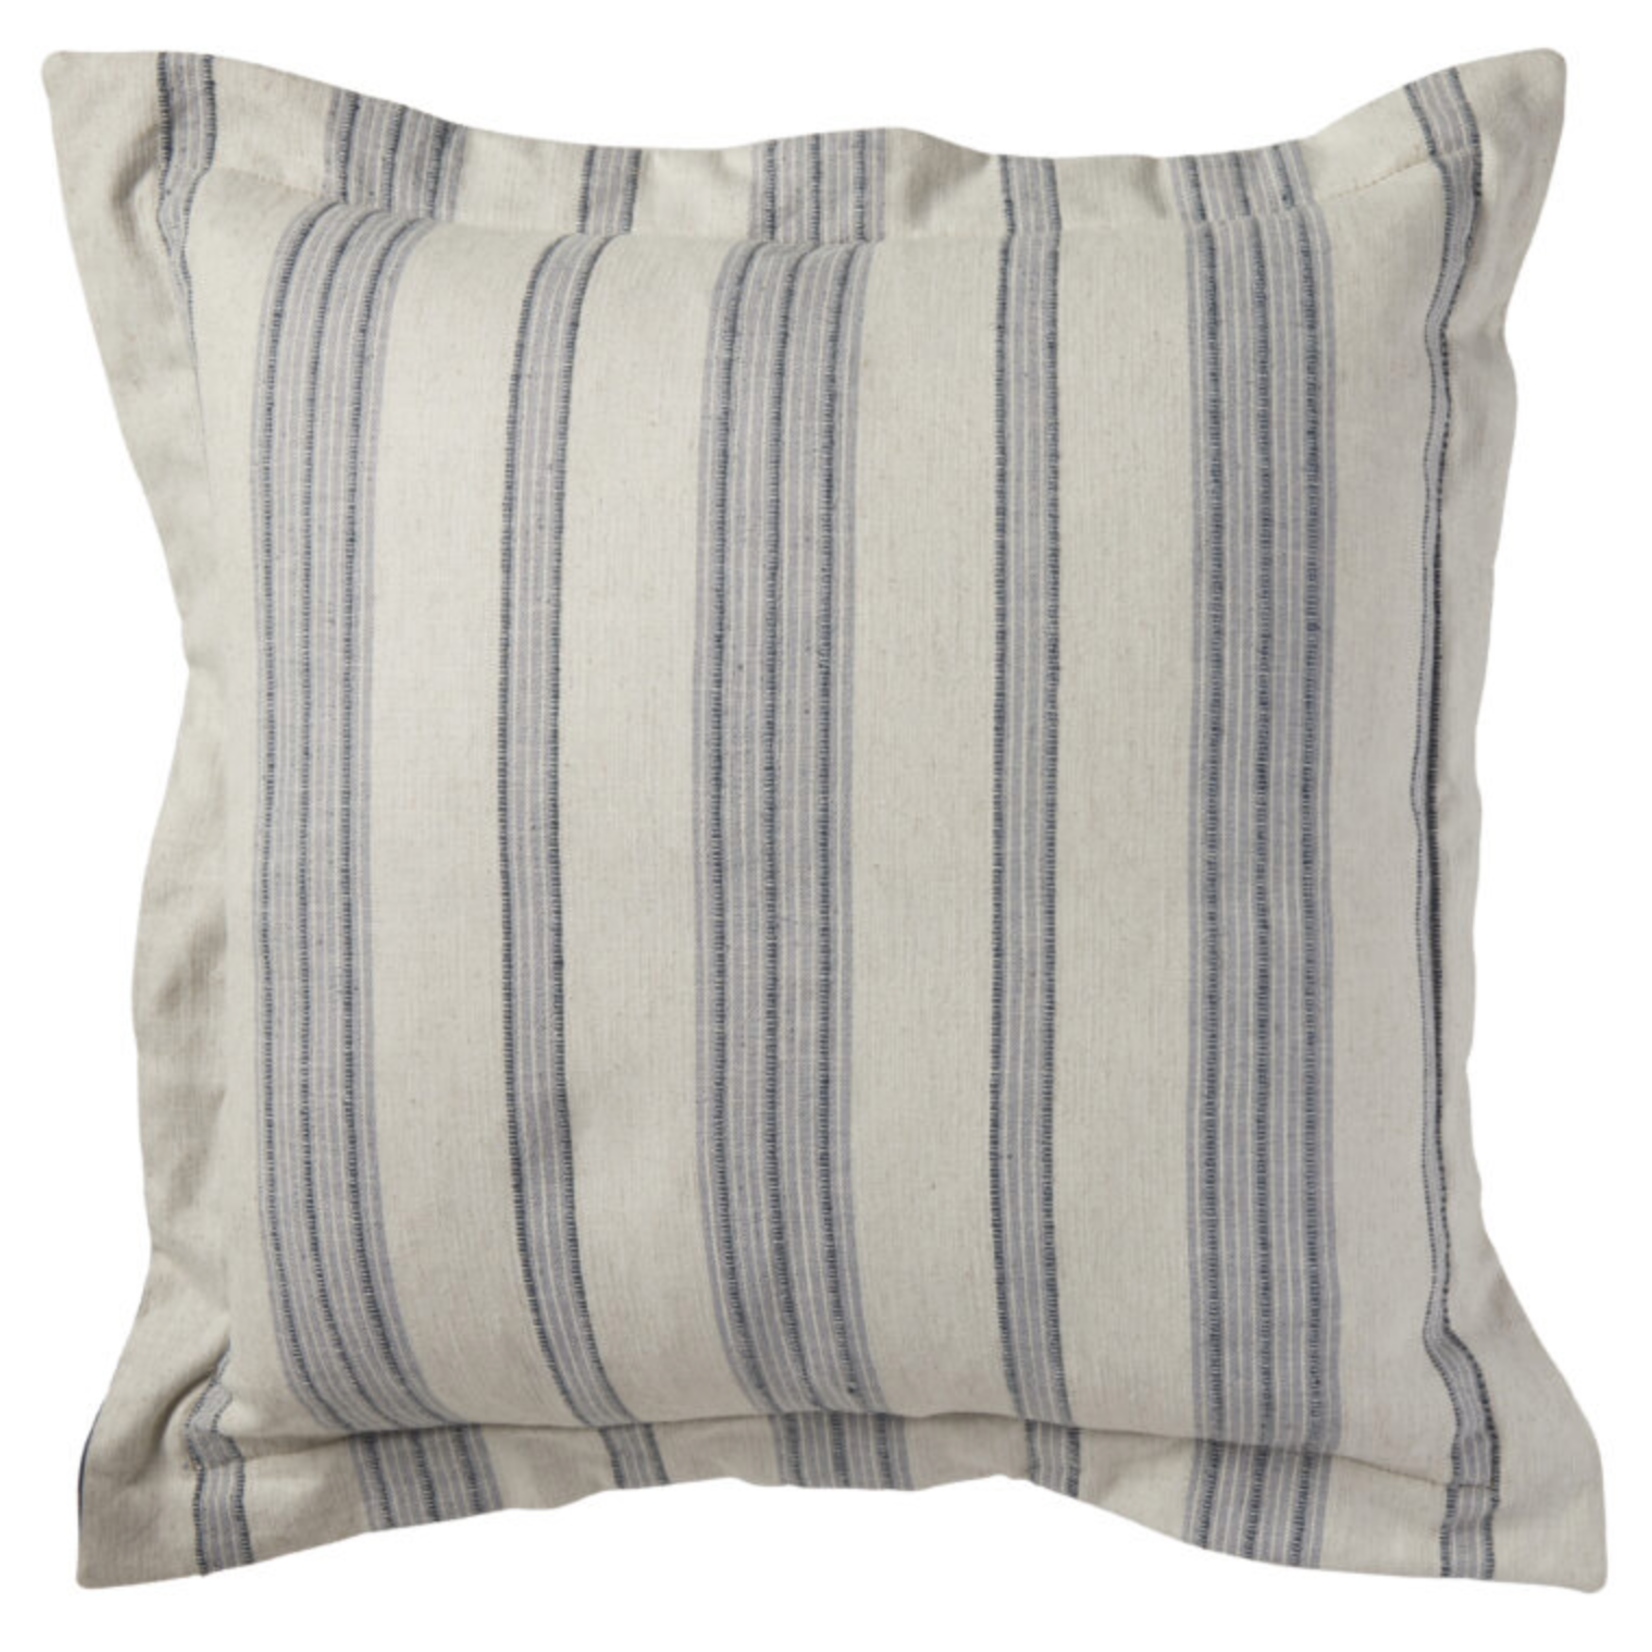 Outside The Box 22x22 Rosemary Stripe Denim Feather Down Accent Pillow